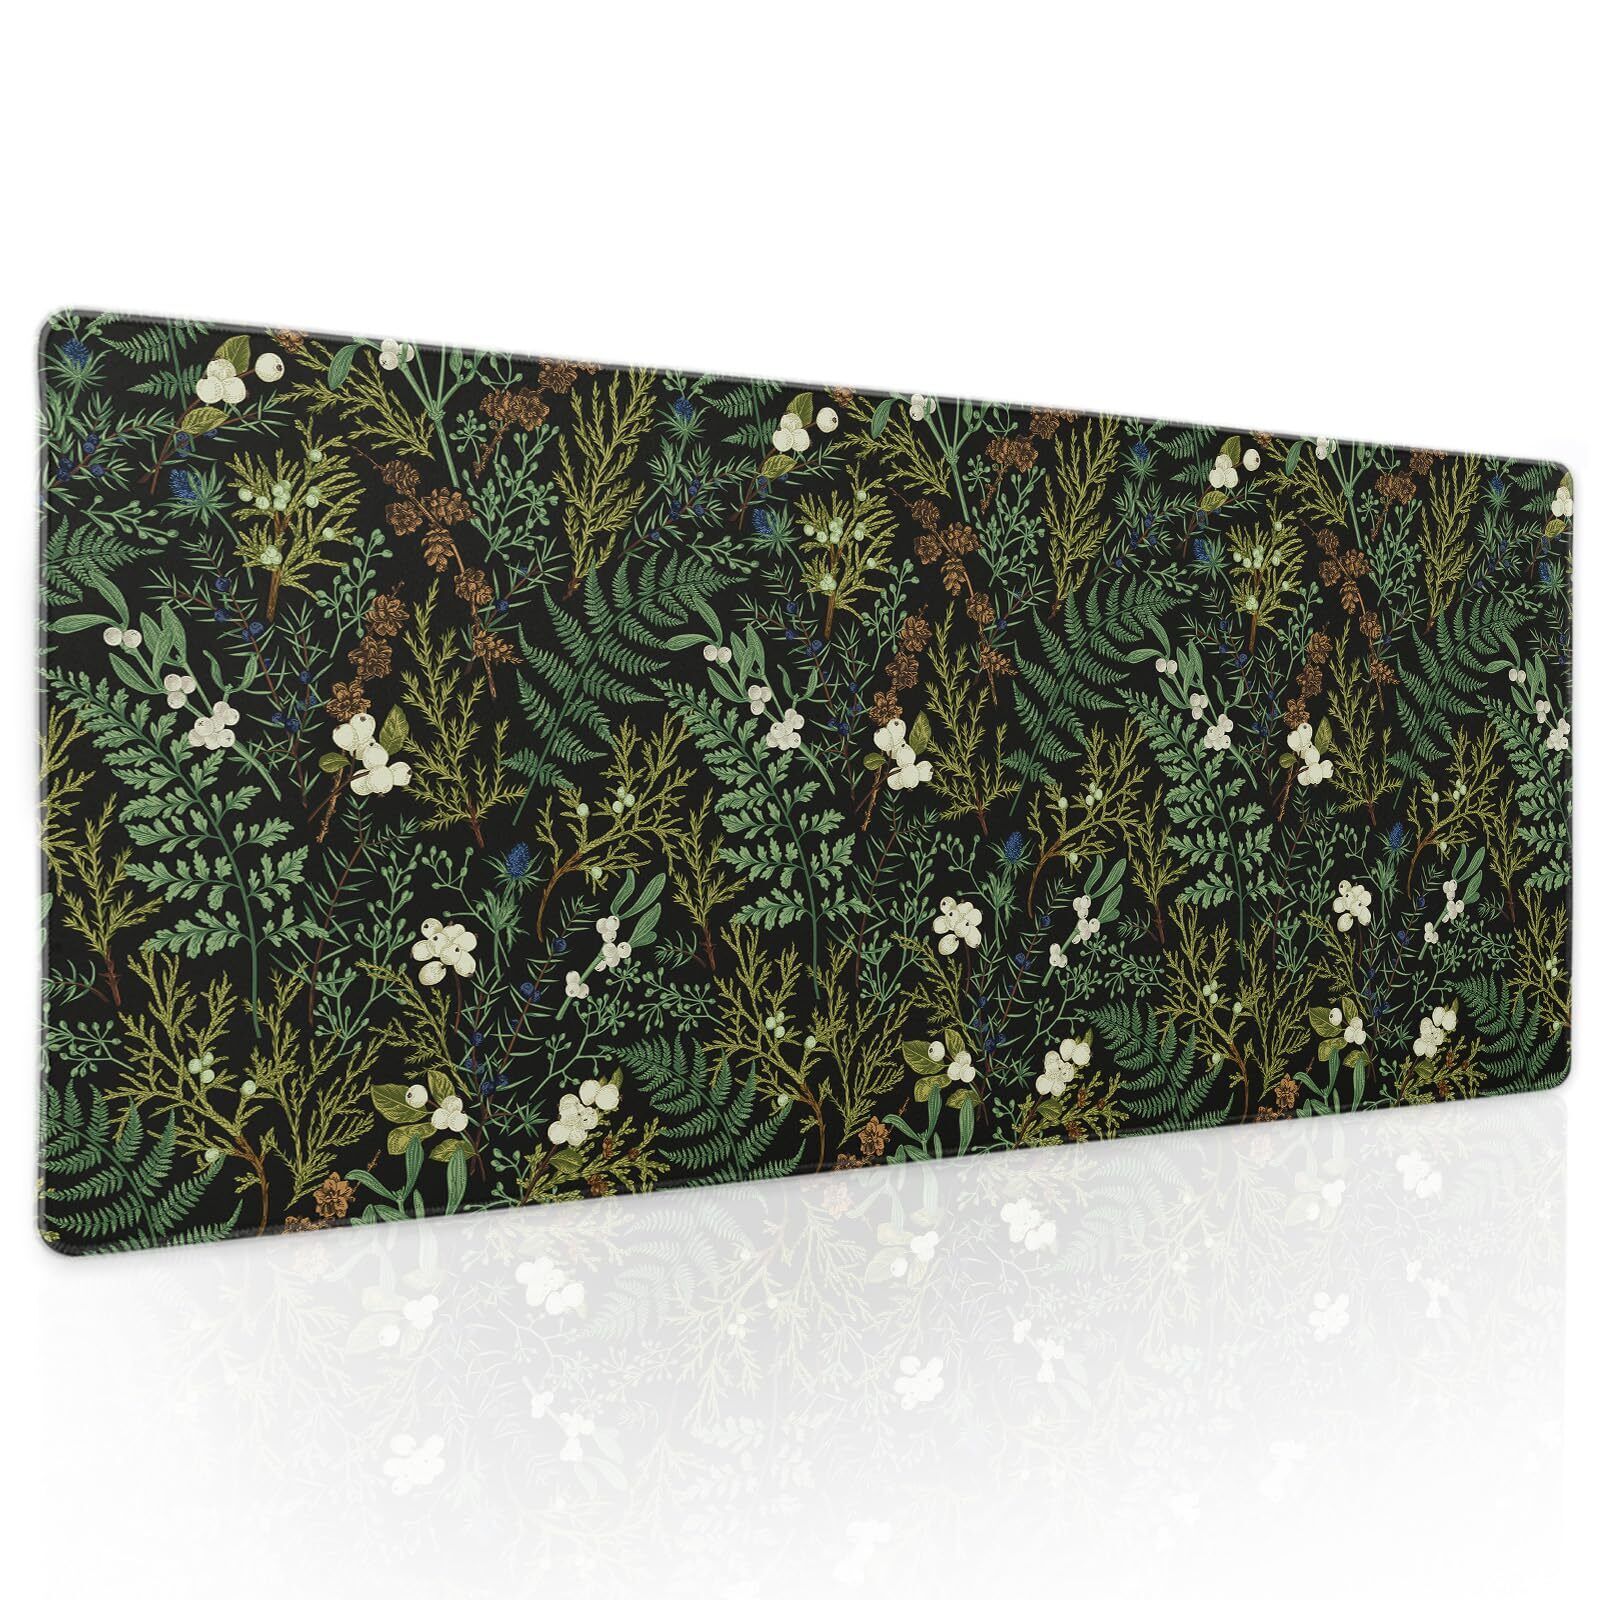 Black Aesthetic Vintage Botanical Gaming Mouse Pad XL Cute Forest Green Plant...